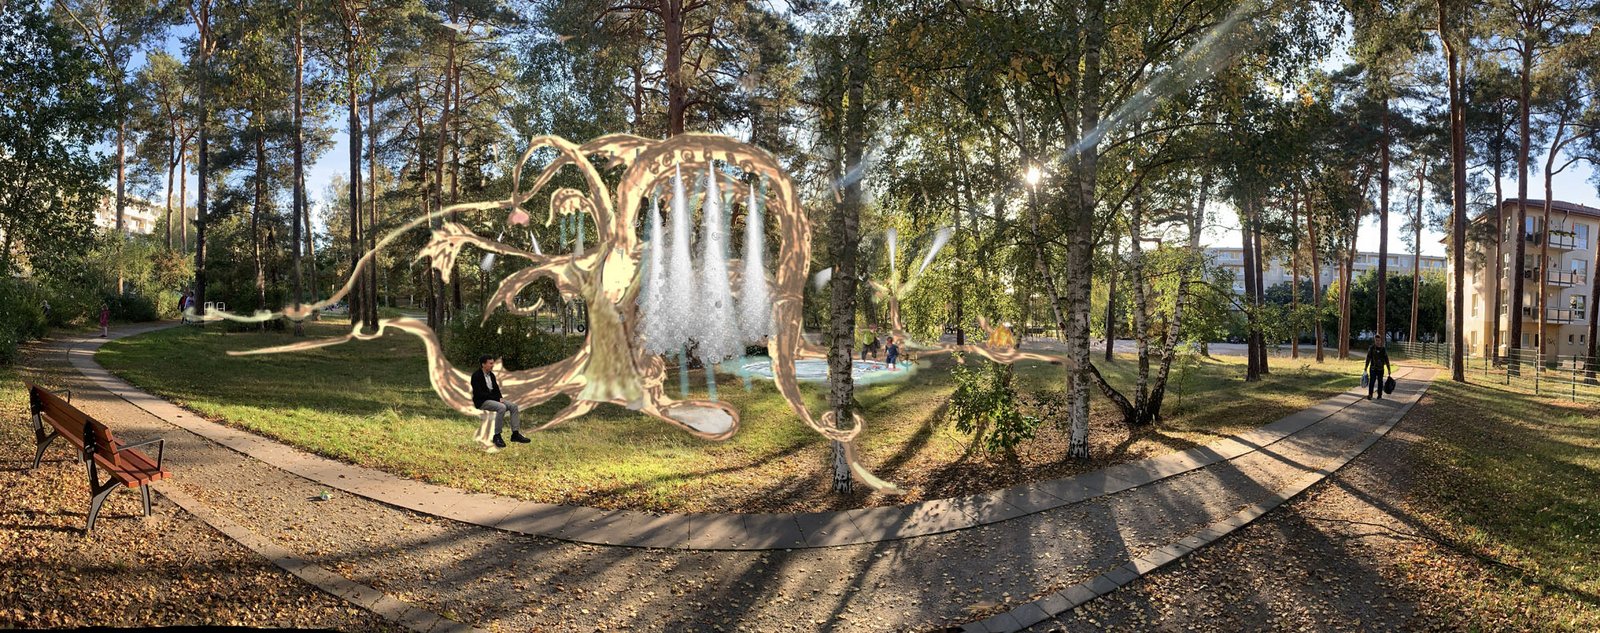 Visualisation of the water playground by artist Laure Prouvost between the residential blocks of Eberswalde.